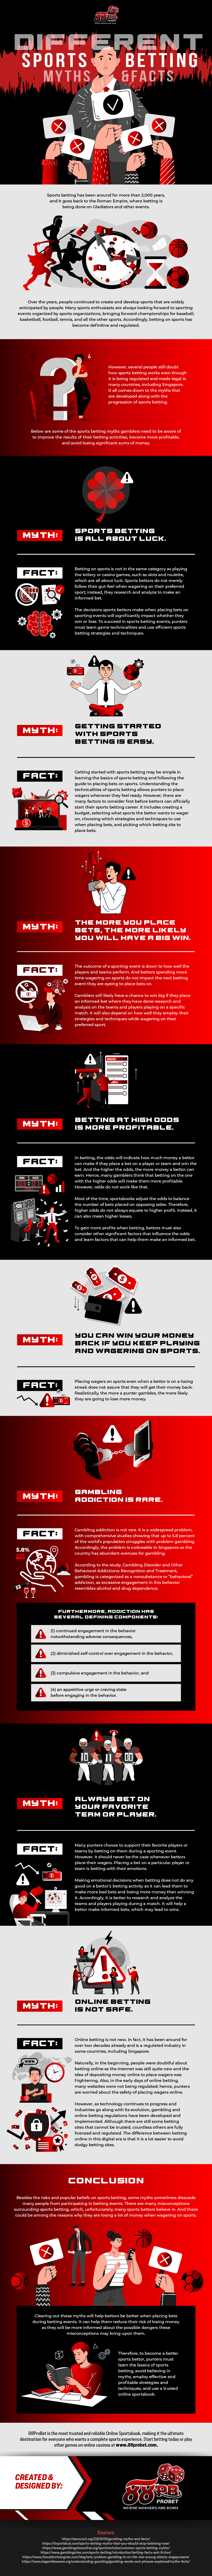 different-sports-betting-myths-facts